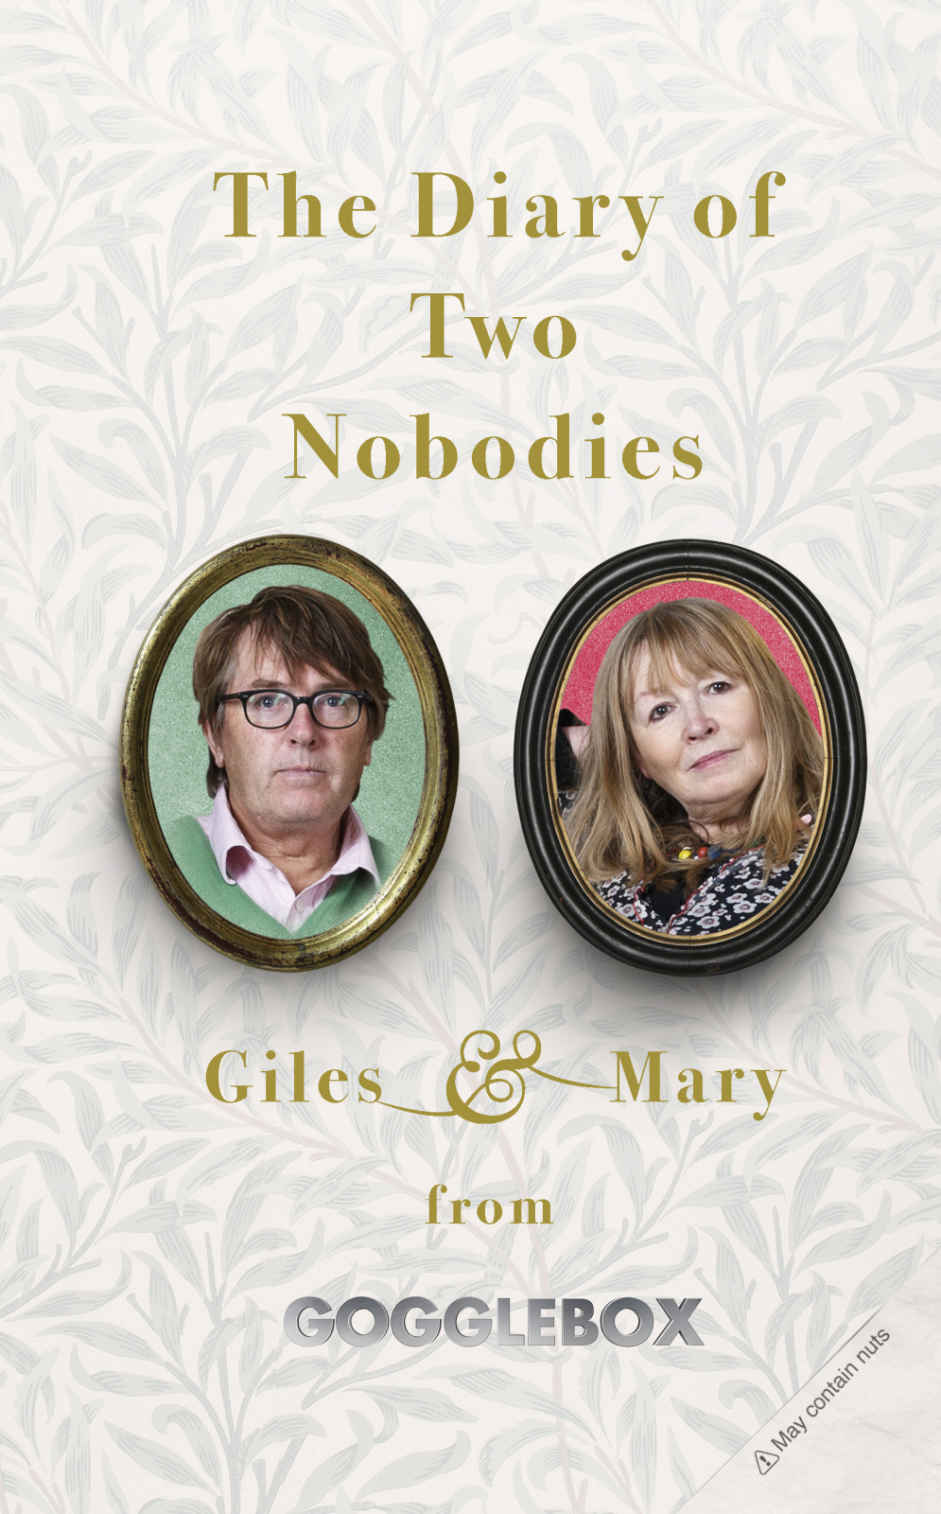 Cover of Giles and Mary's book